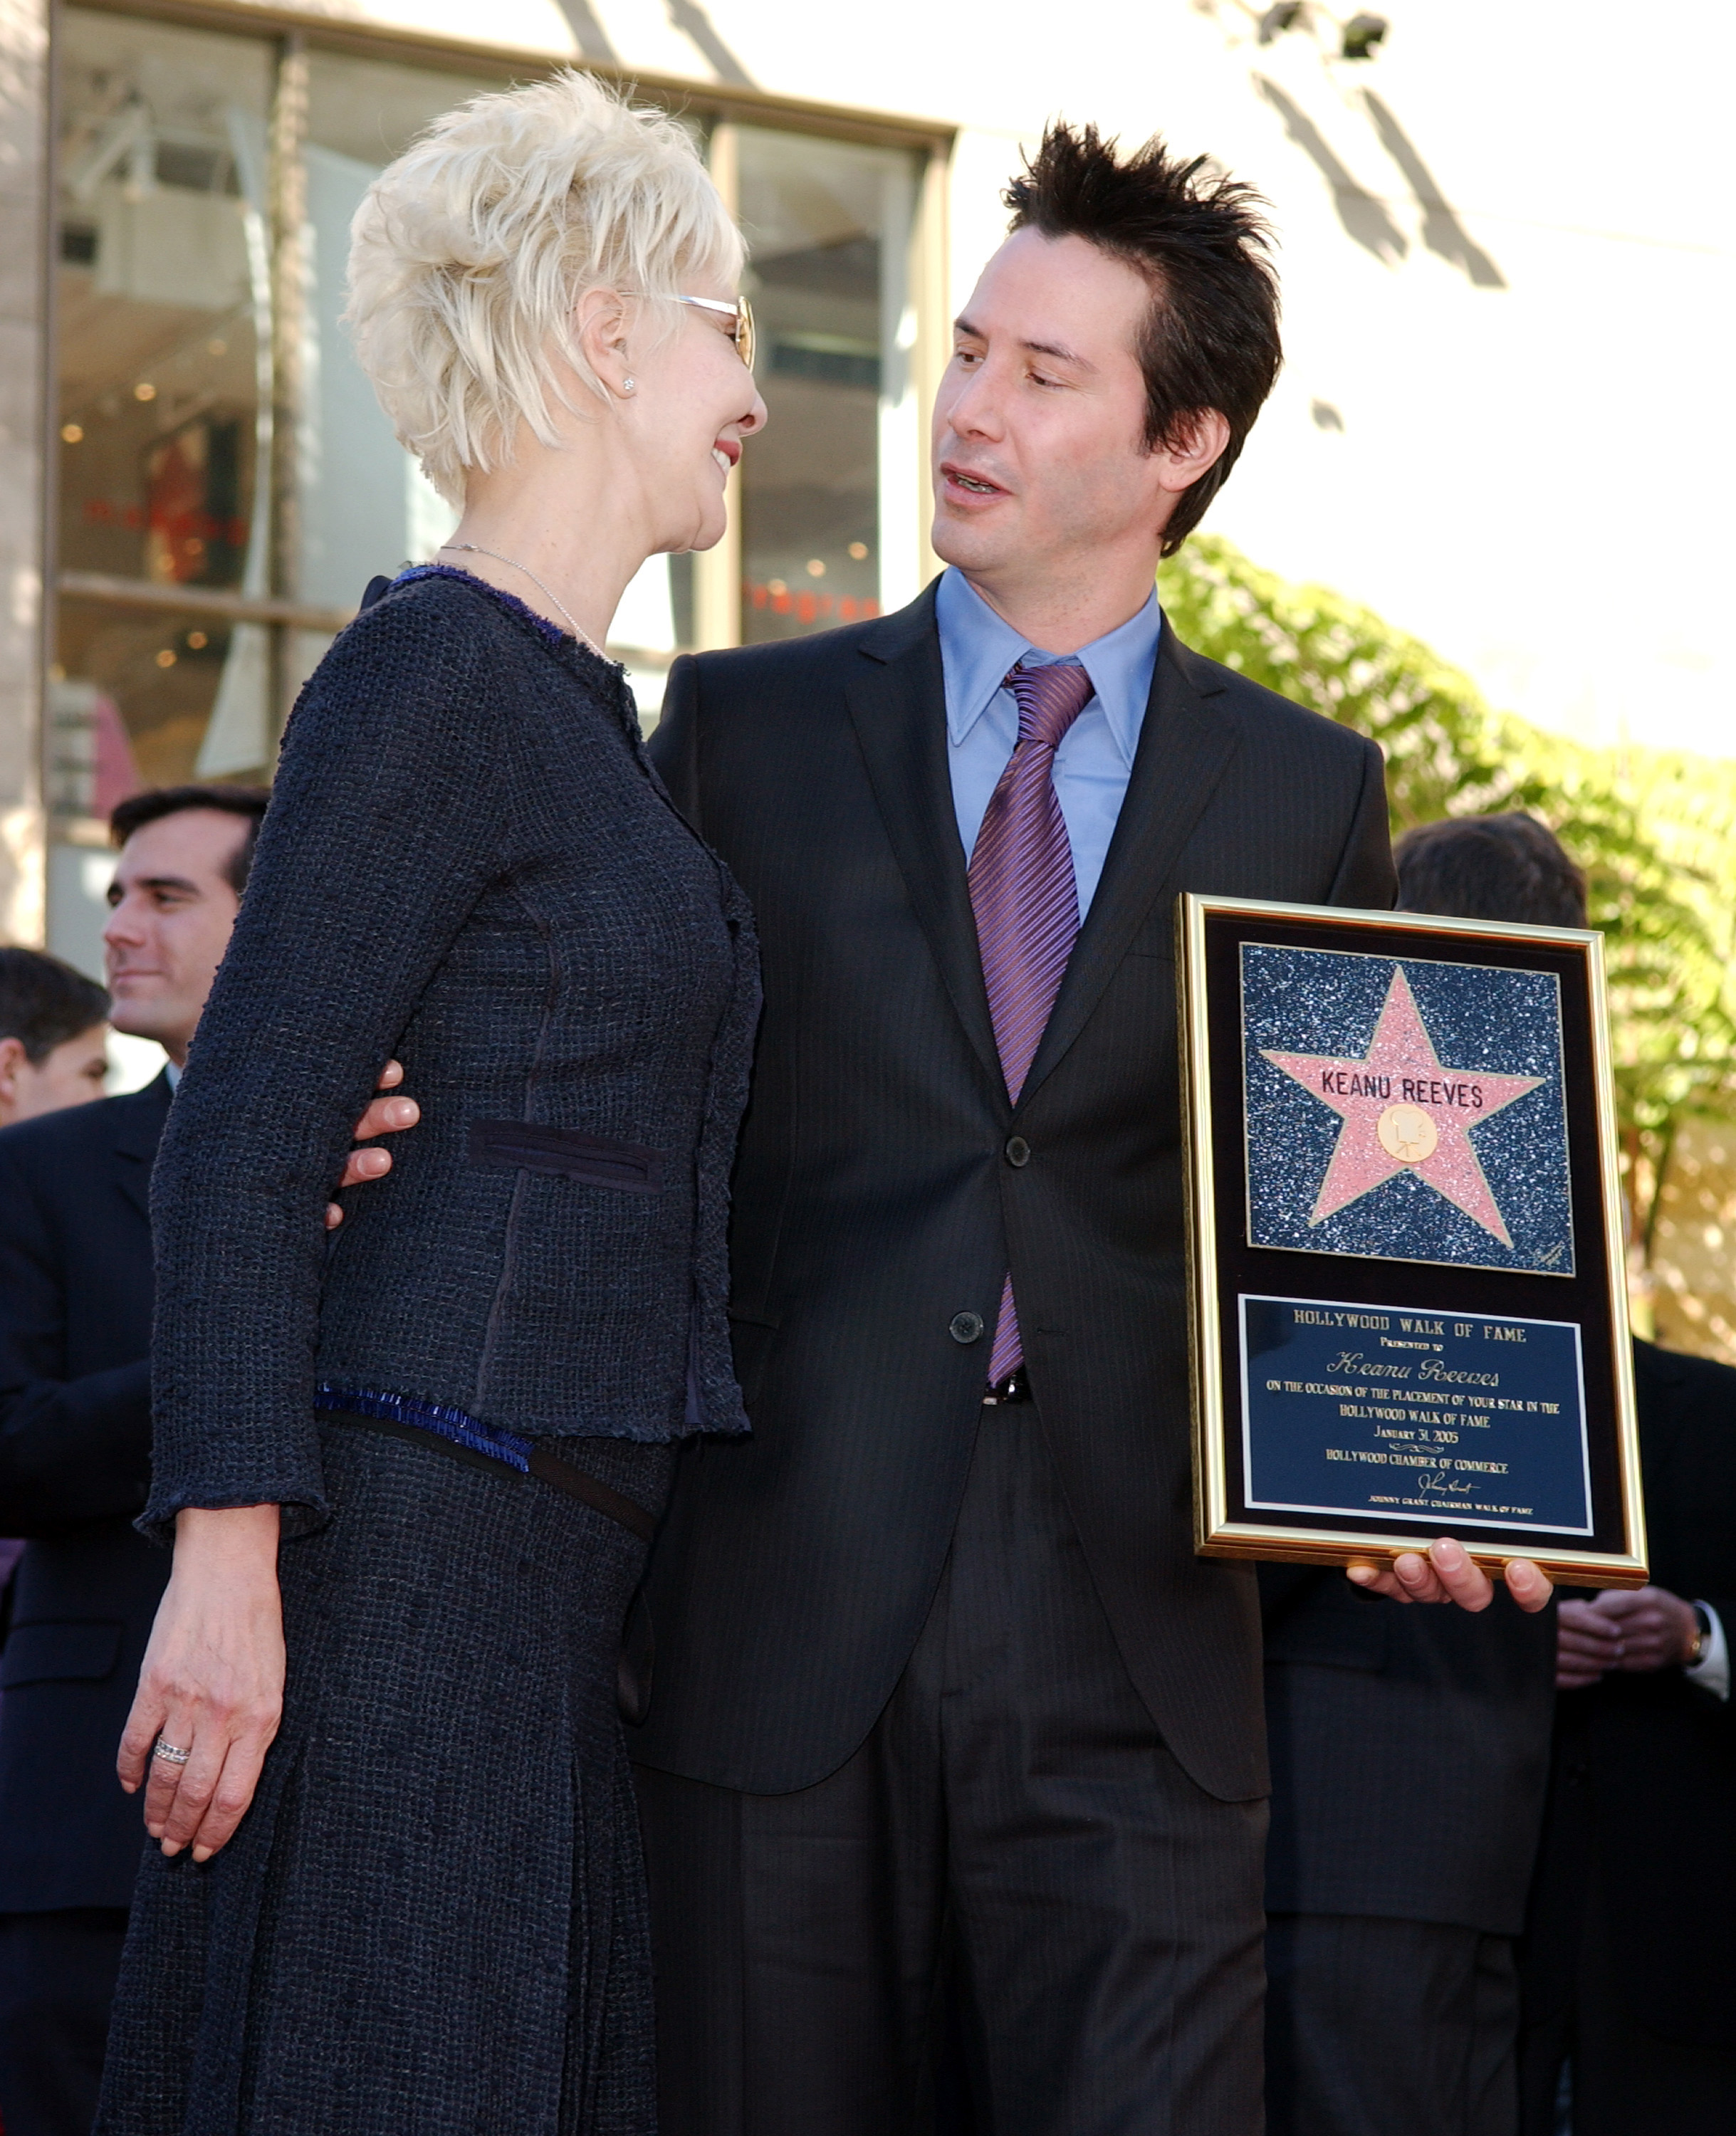 Keanu Reeves and Patricia Taylor in Hollywood, California, in 2005 | Source: Getty Images